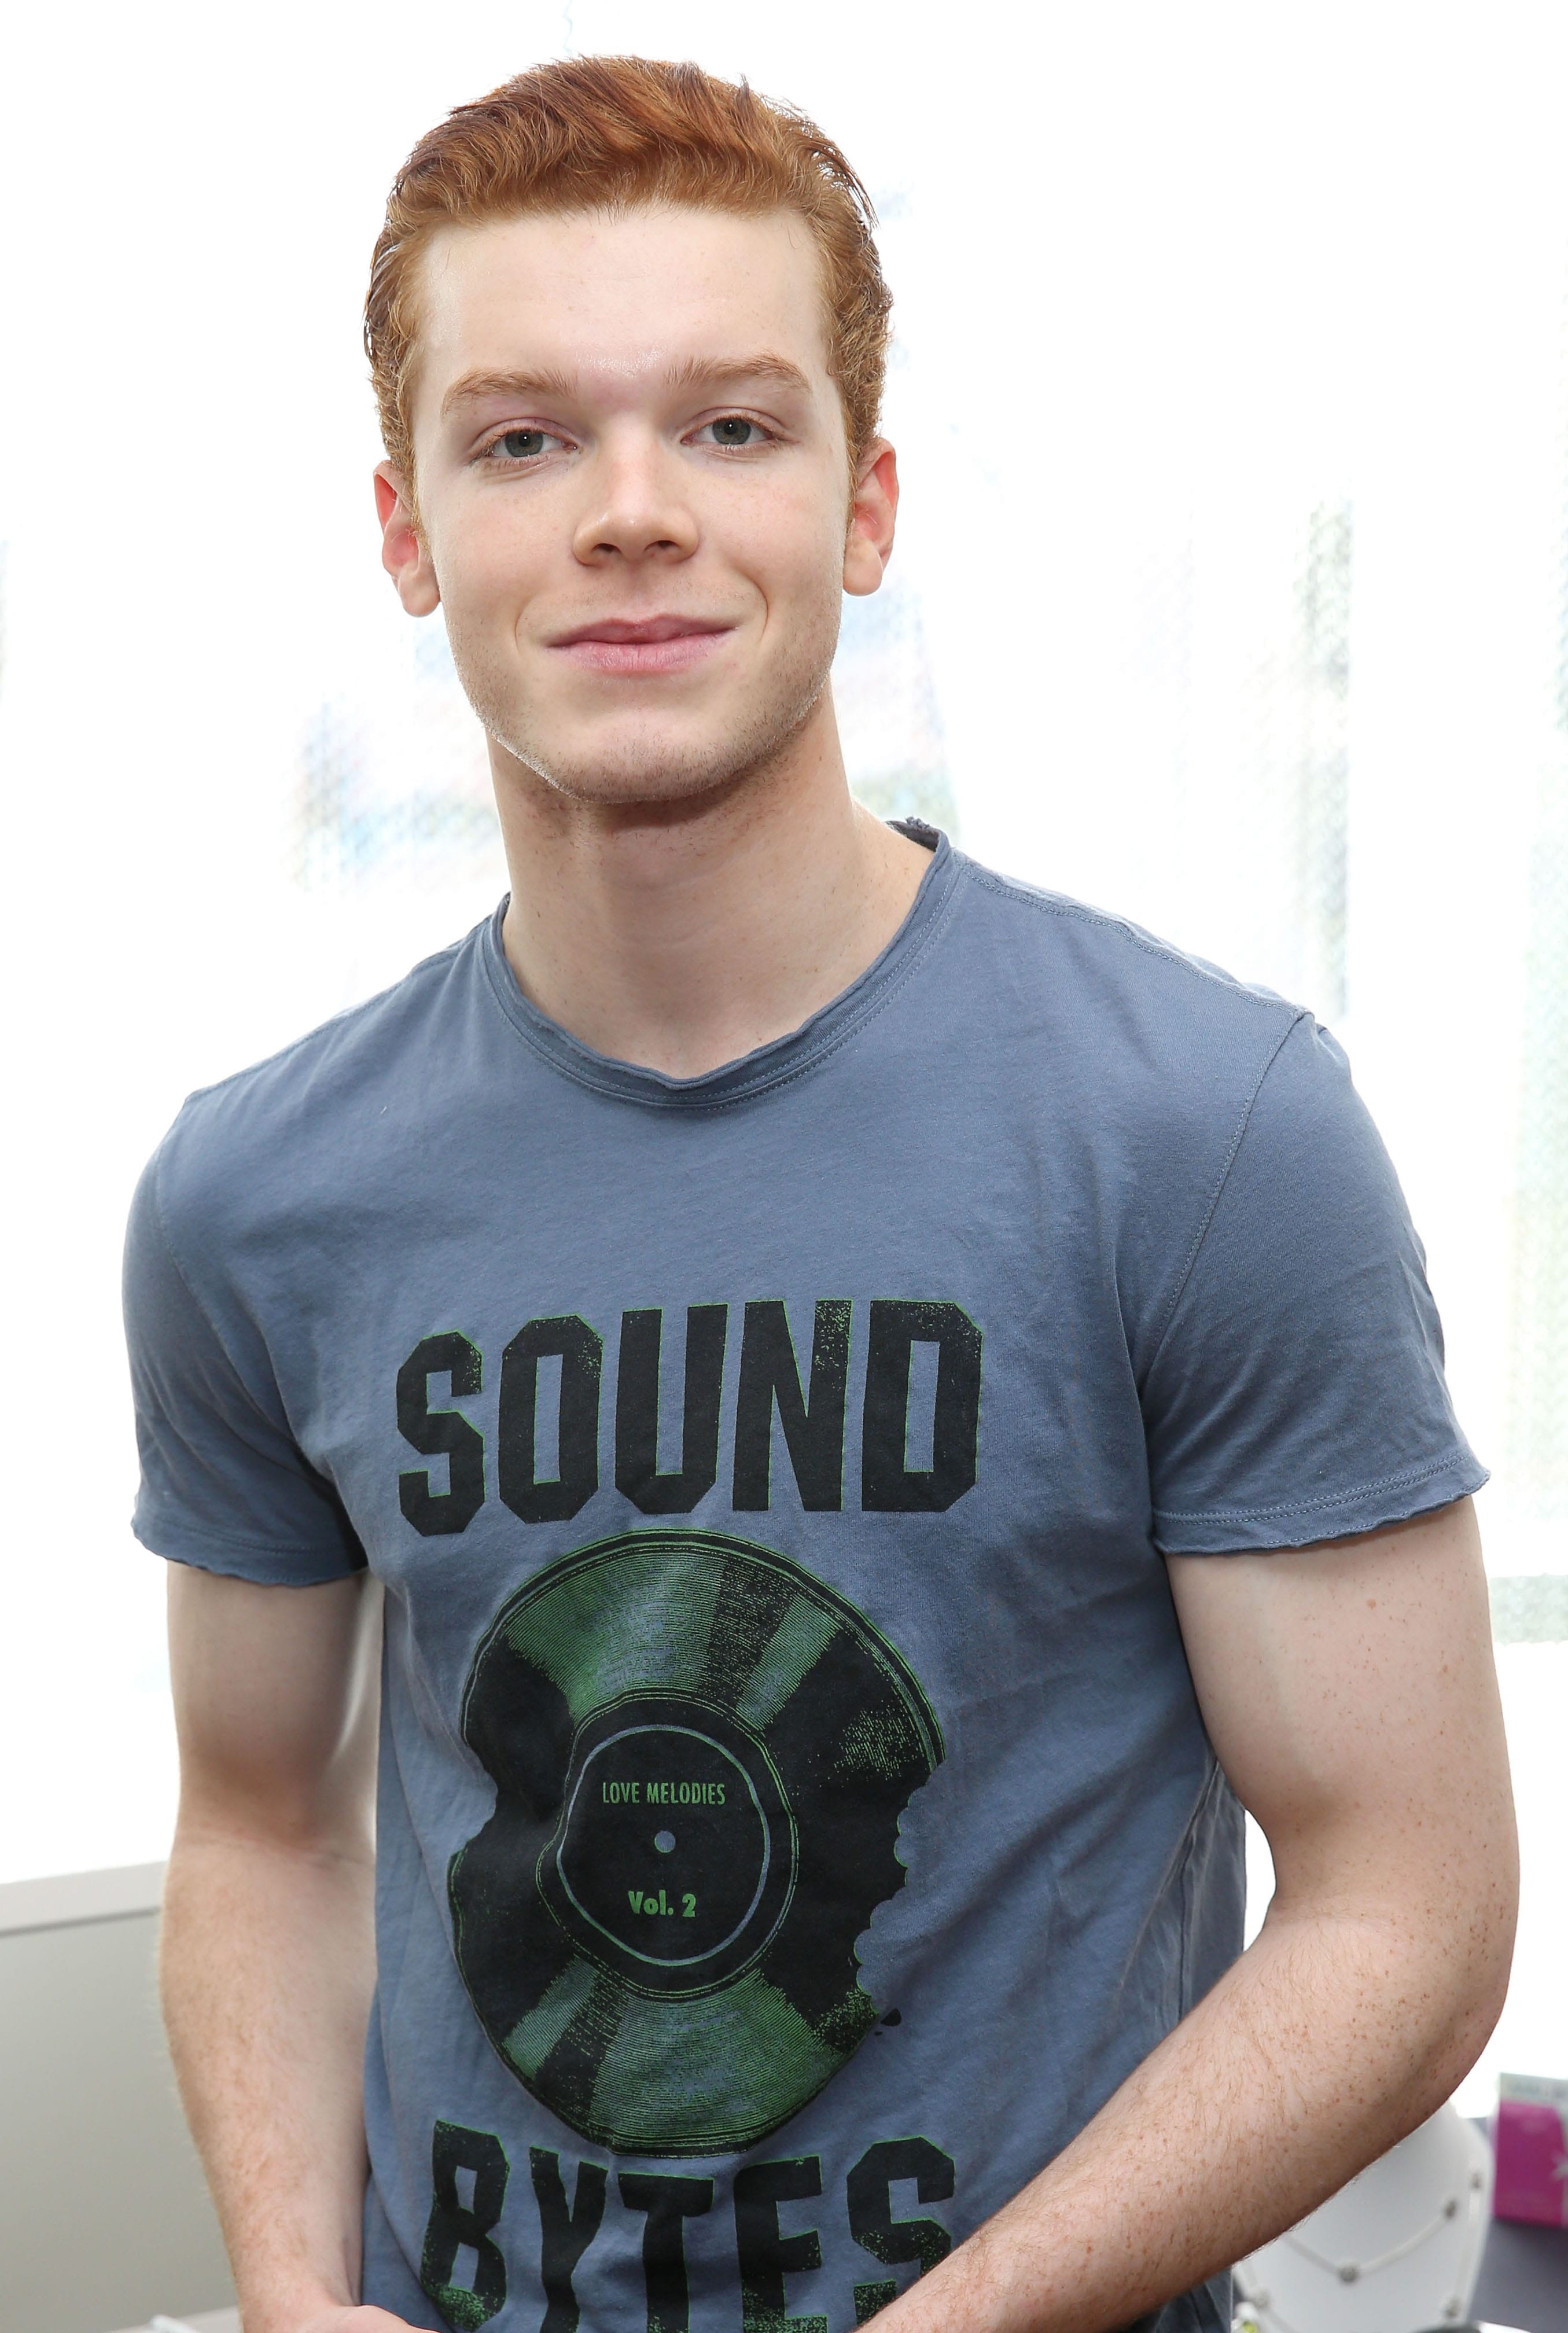 Cameron Monaghan Profile | Contact ( Phone Number, Social 